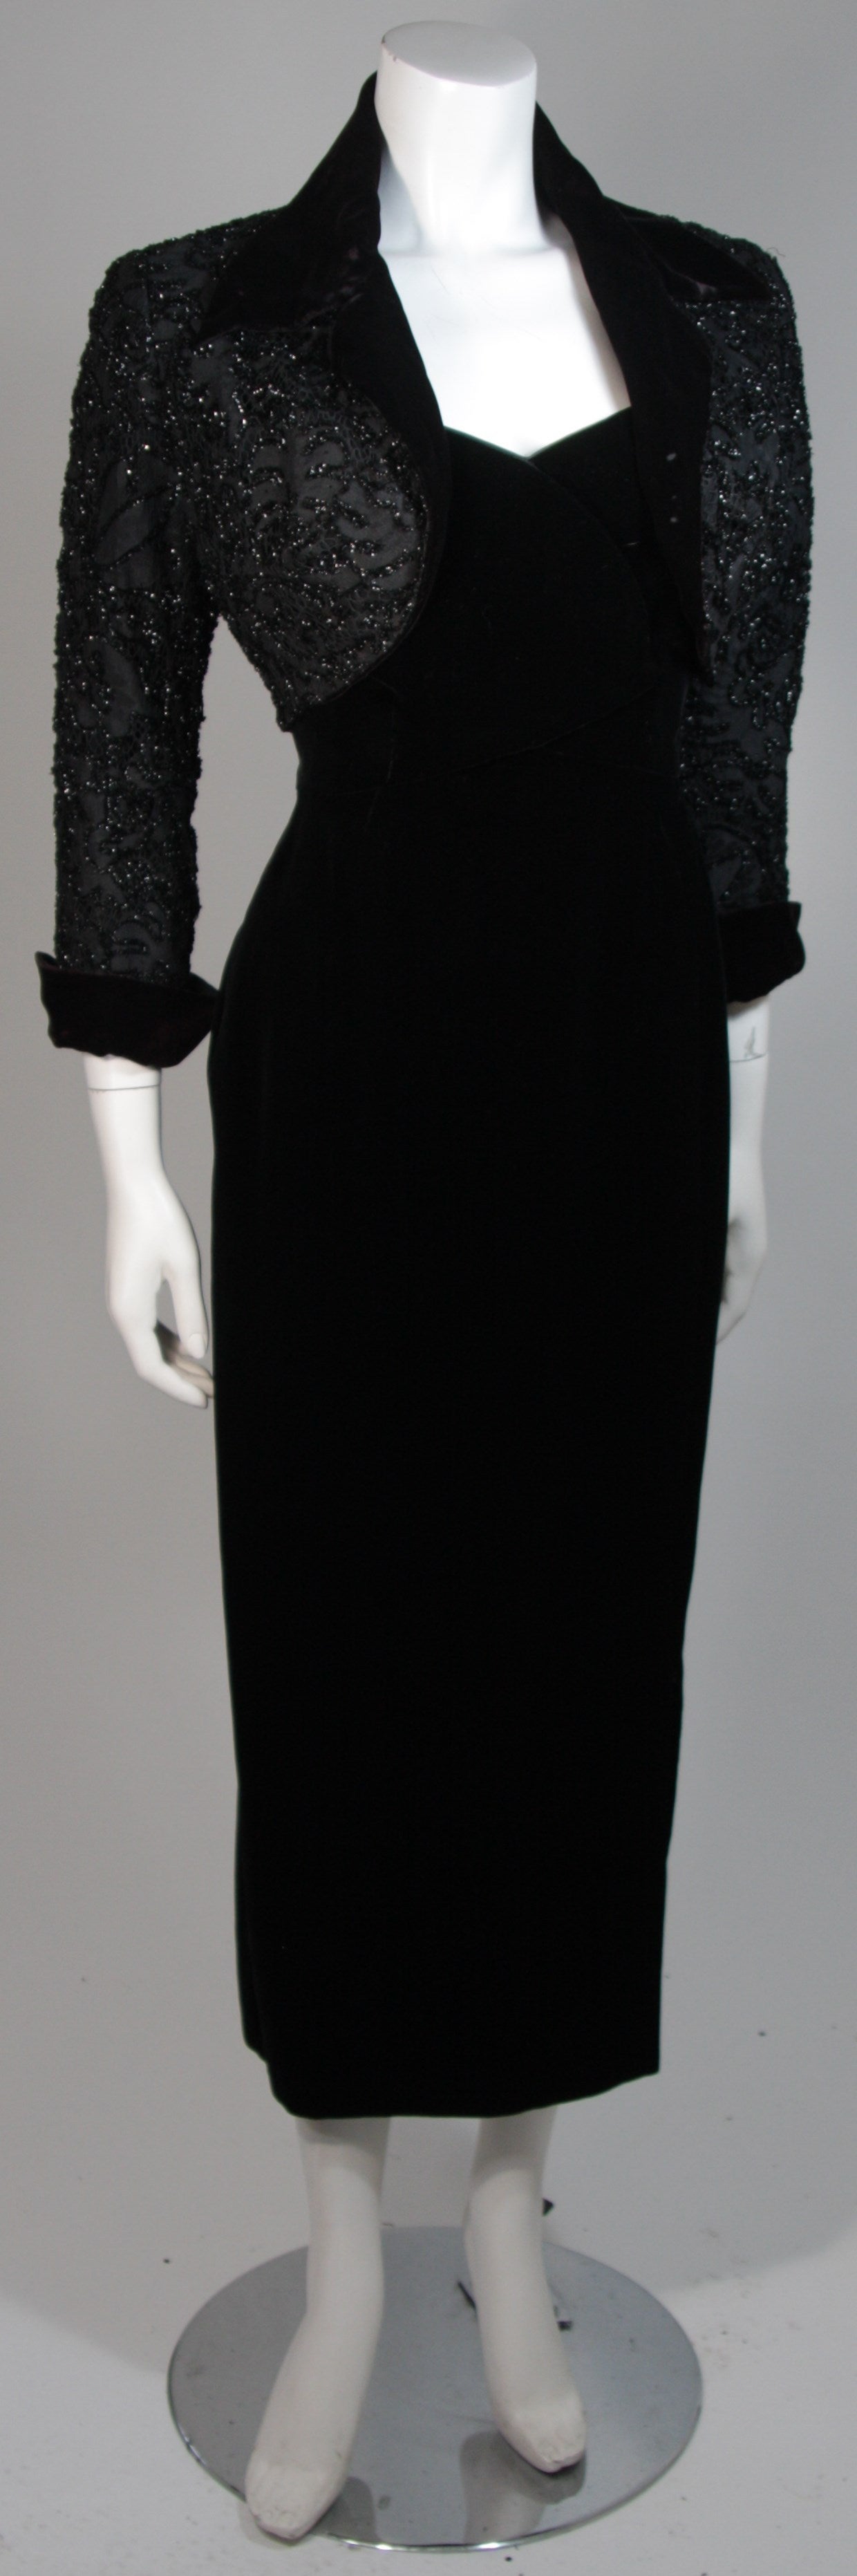 This Howard Greer set is composed of velvet, featuring an embellished bolero with black beading and sequins., The jacket has an open style and is trimmed in velvet. The dress has a zipper closure. In excellent condition.

**Please cross-reference